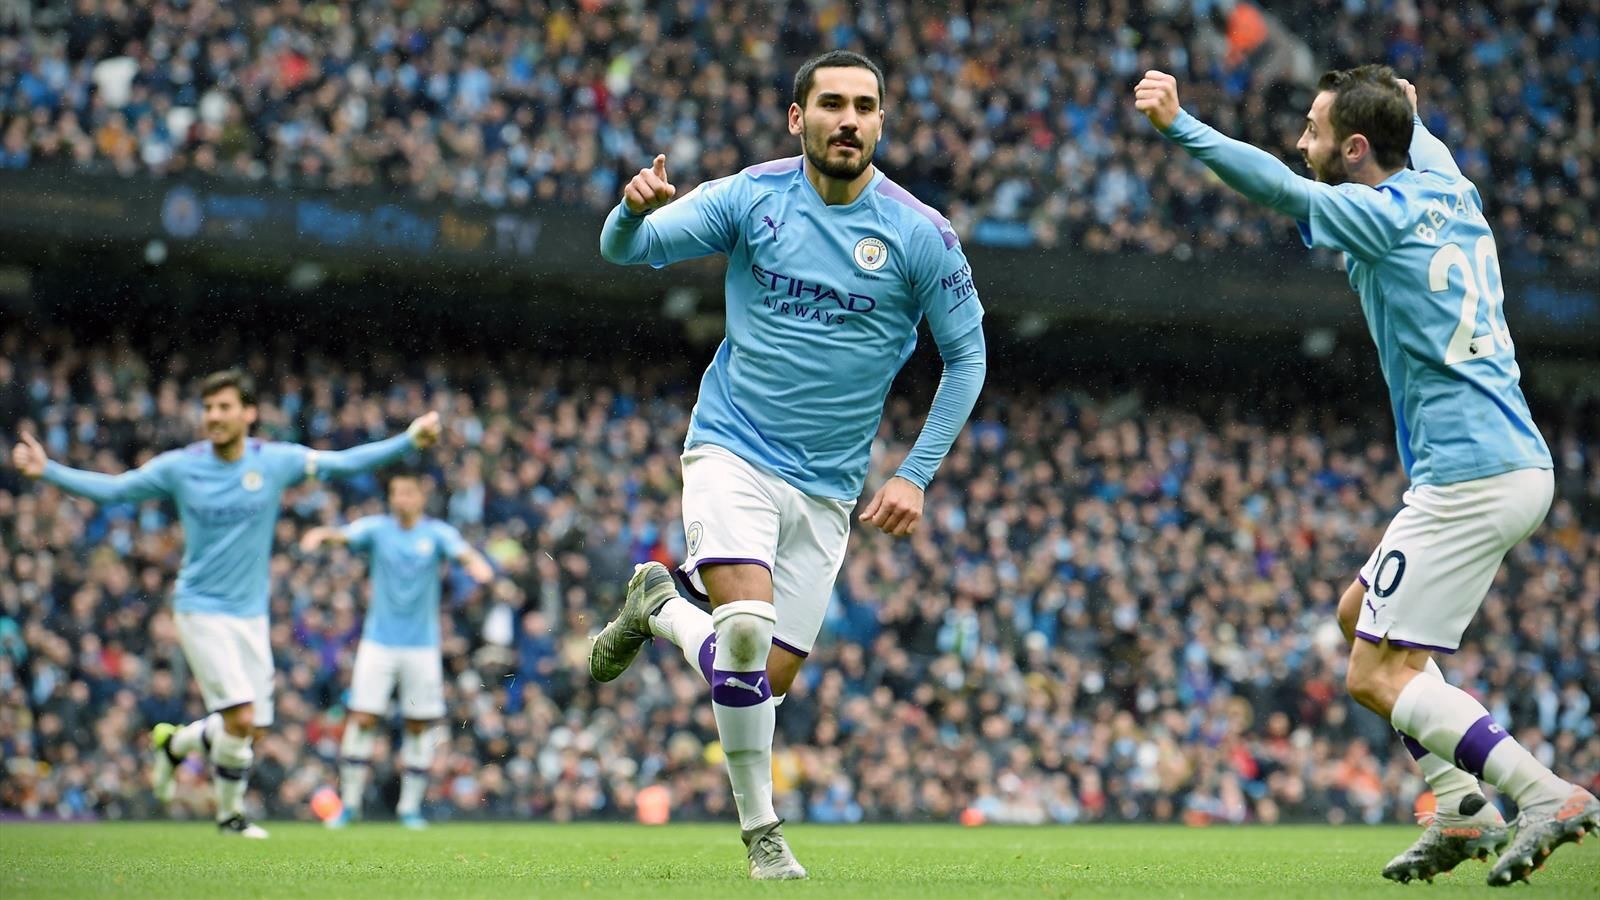 Gundogan would love to play with Lionel Messi and Cristiano Ronaldo as team